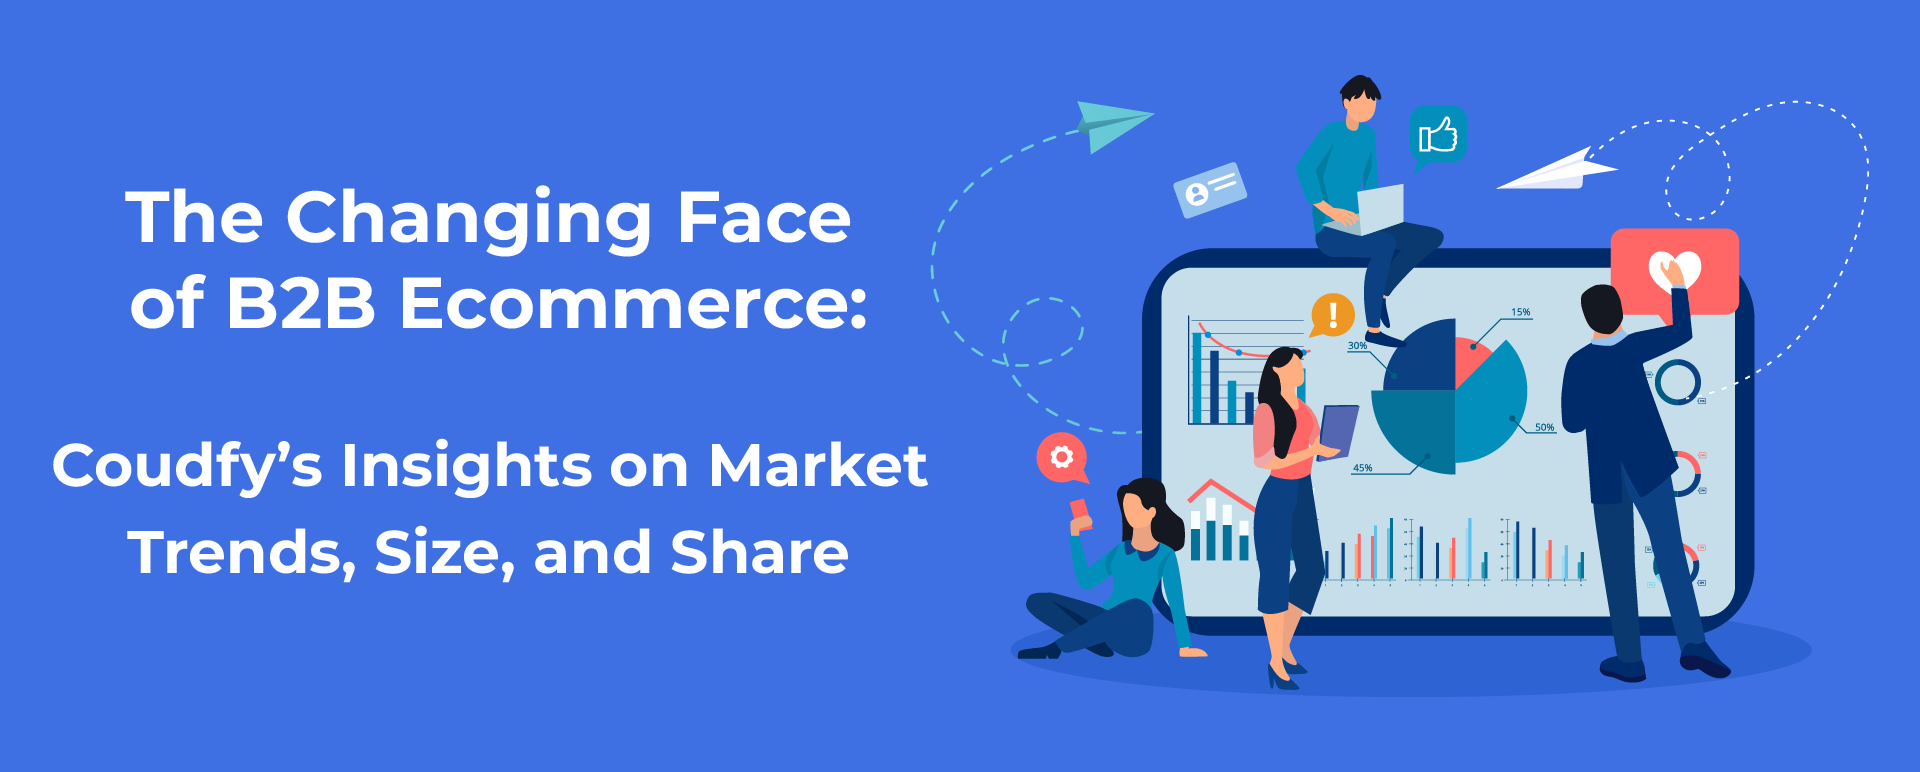 The Changing Face of B2B Ecommerce